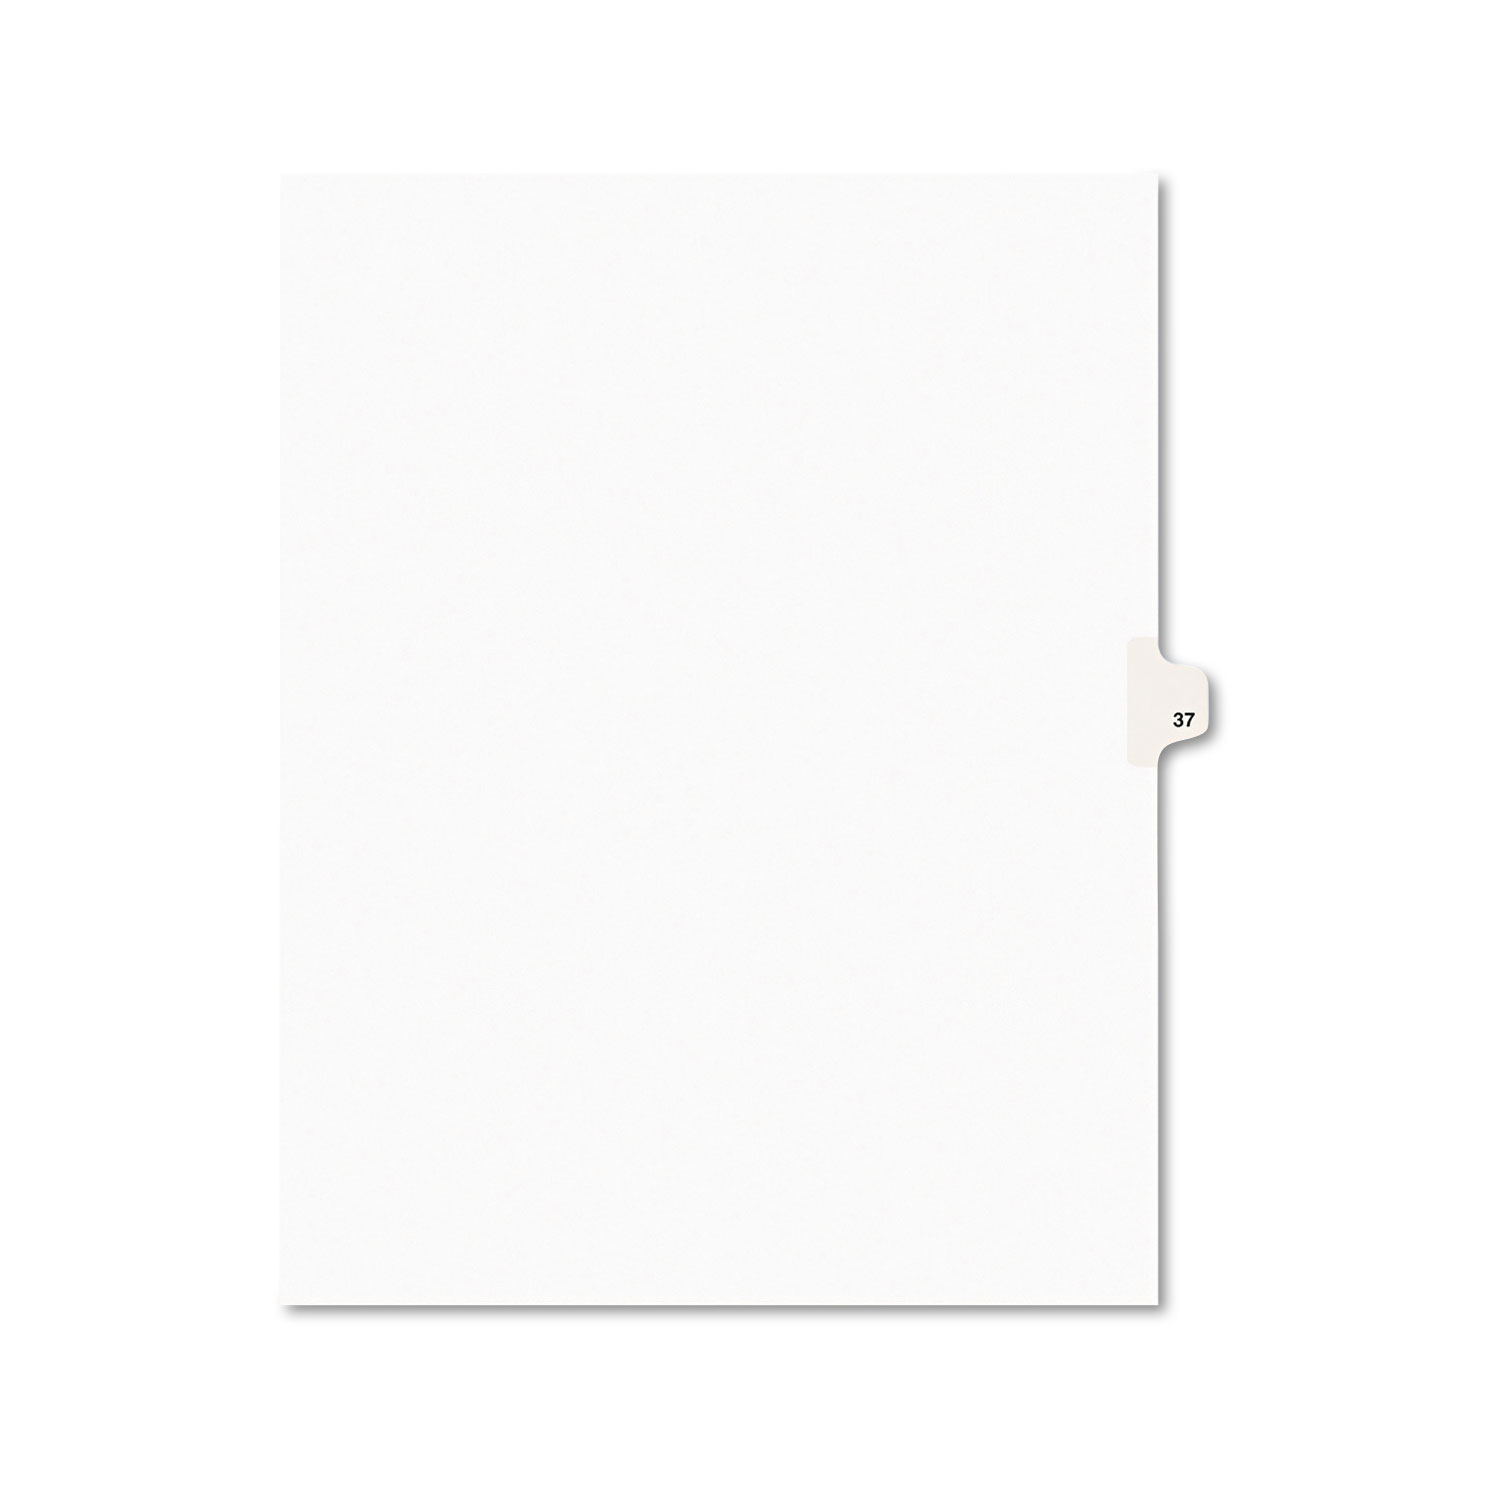  Avery 01037 Preprinted Legal Exhibit Side Tab Index Dividers, Avery Style, 10-Tab, 37, 11 x 8.5, White, 25/Pack (AVE01037) 